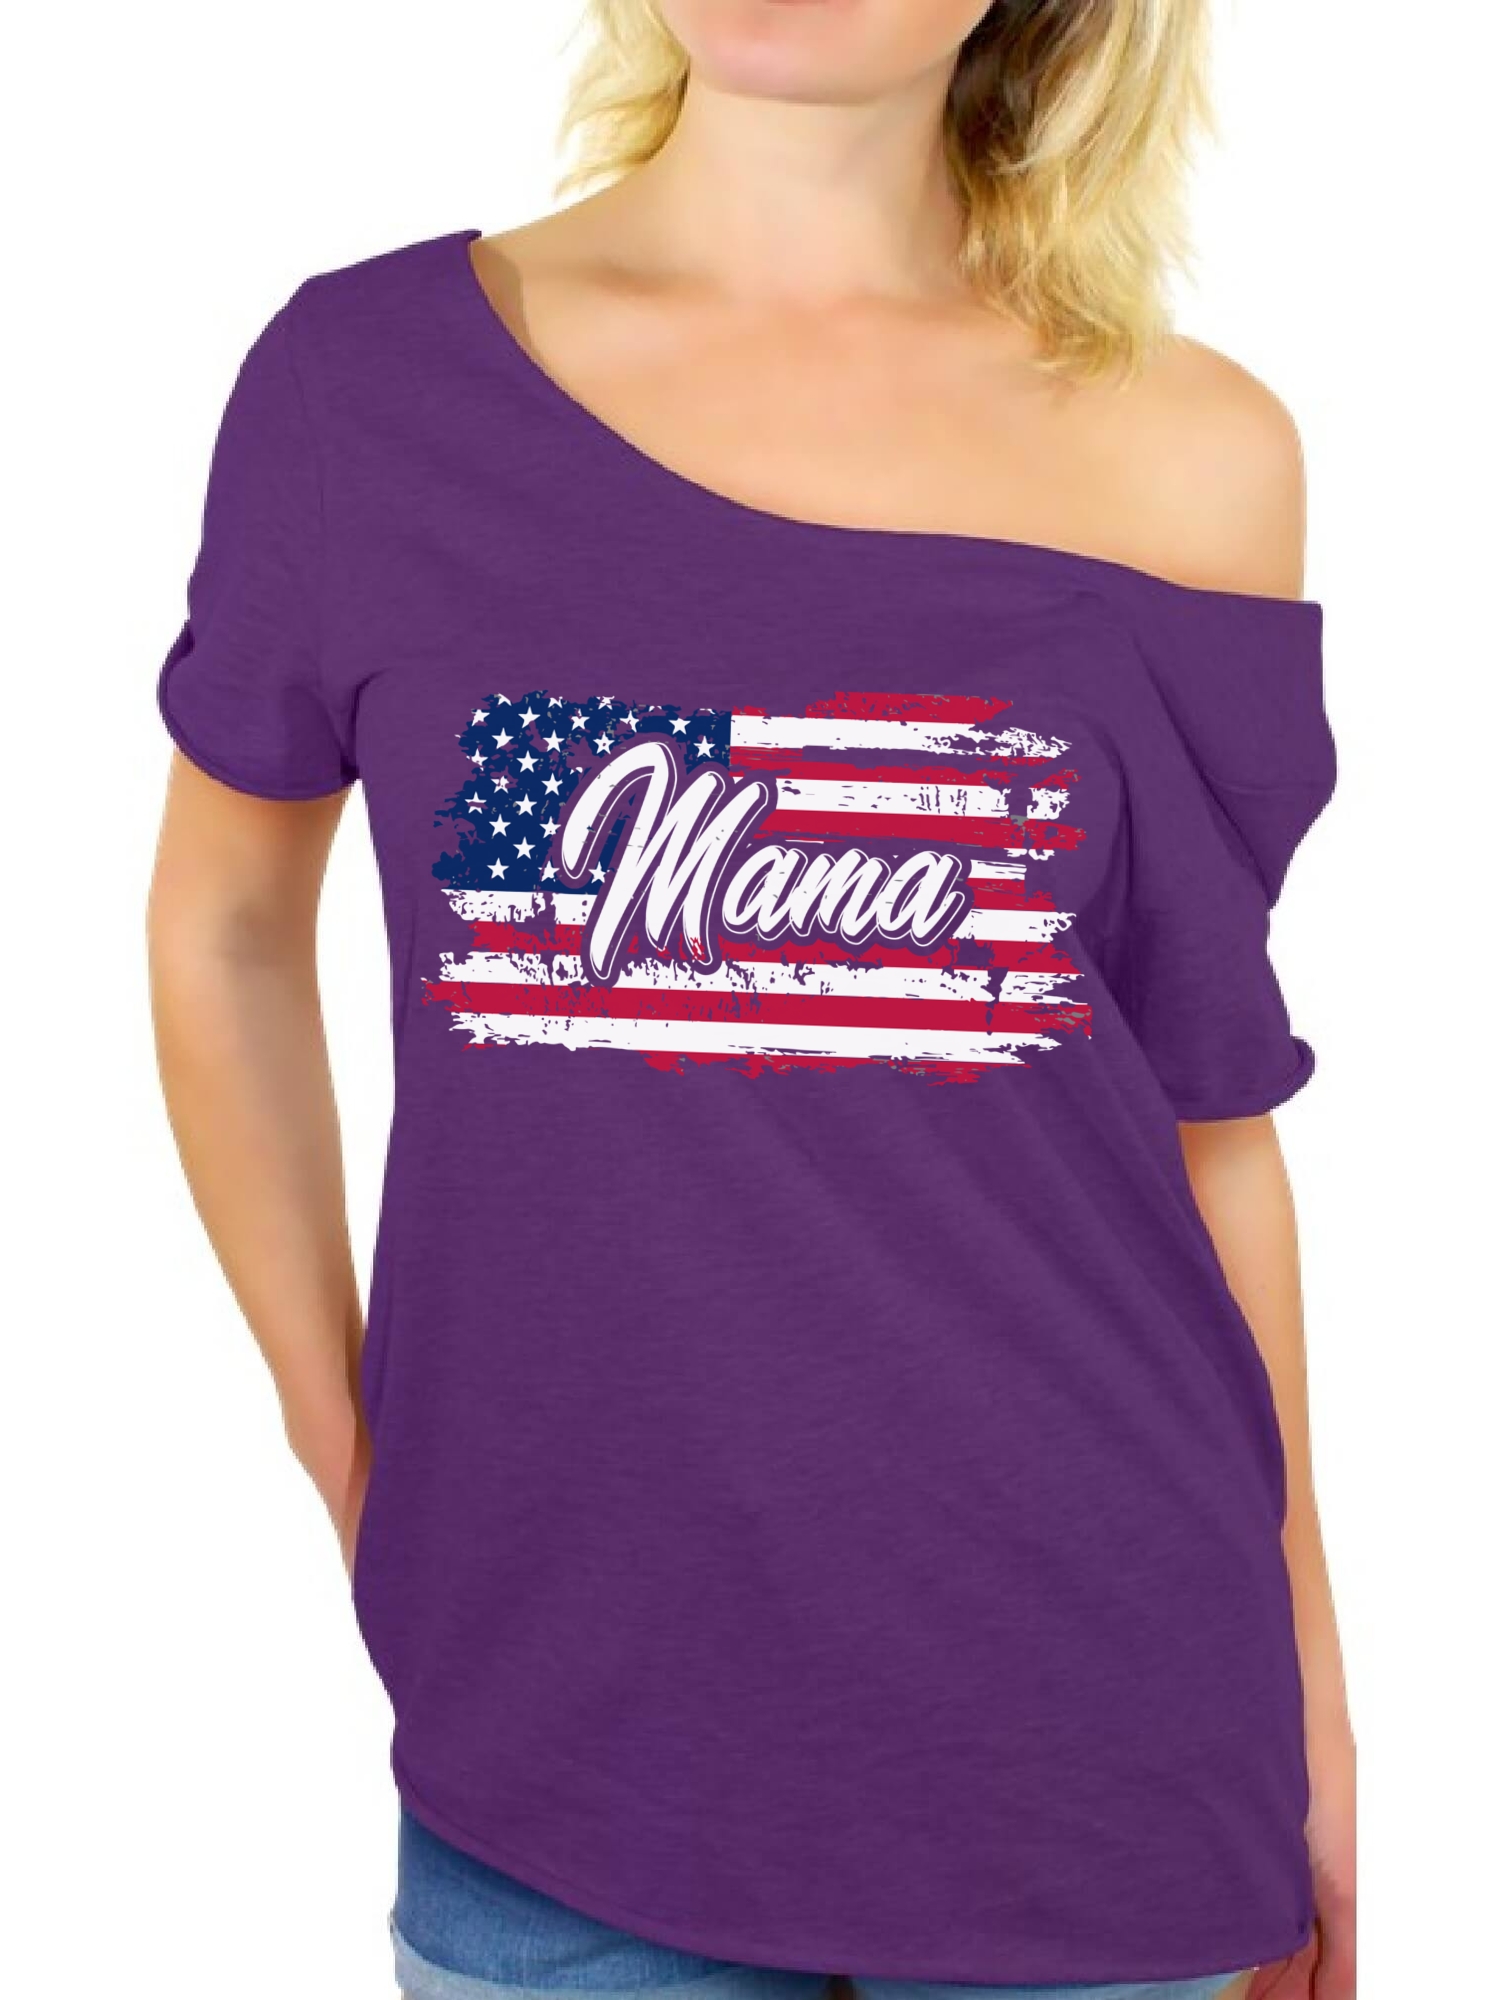 Awkward Styles American Flag Off Shoulder Shirt USA Flag Off Shoulder T shirt for Mama 4th of July Gifts Mama USA Off Shoulder Tshirt Gifts for Mama 4th of July Mama Off Shoulder T-shirt I'm American - image 1 of 4